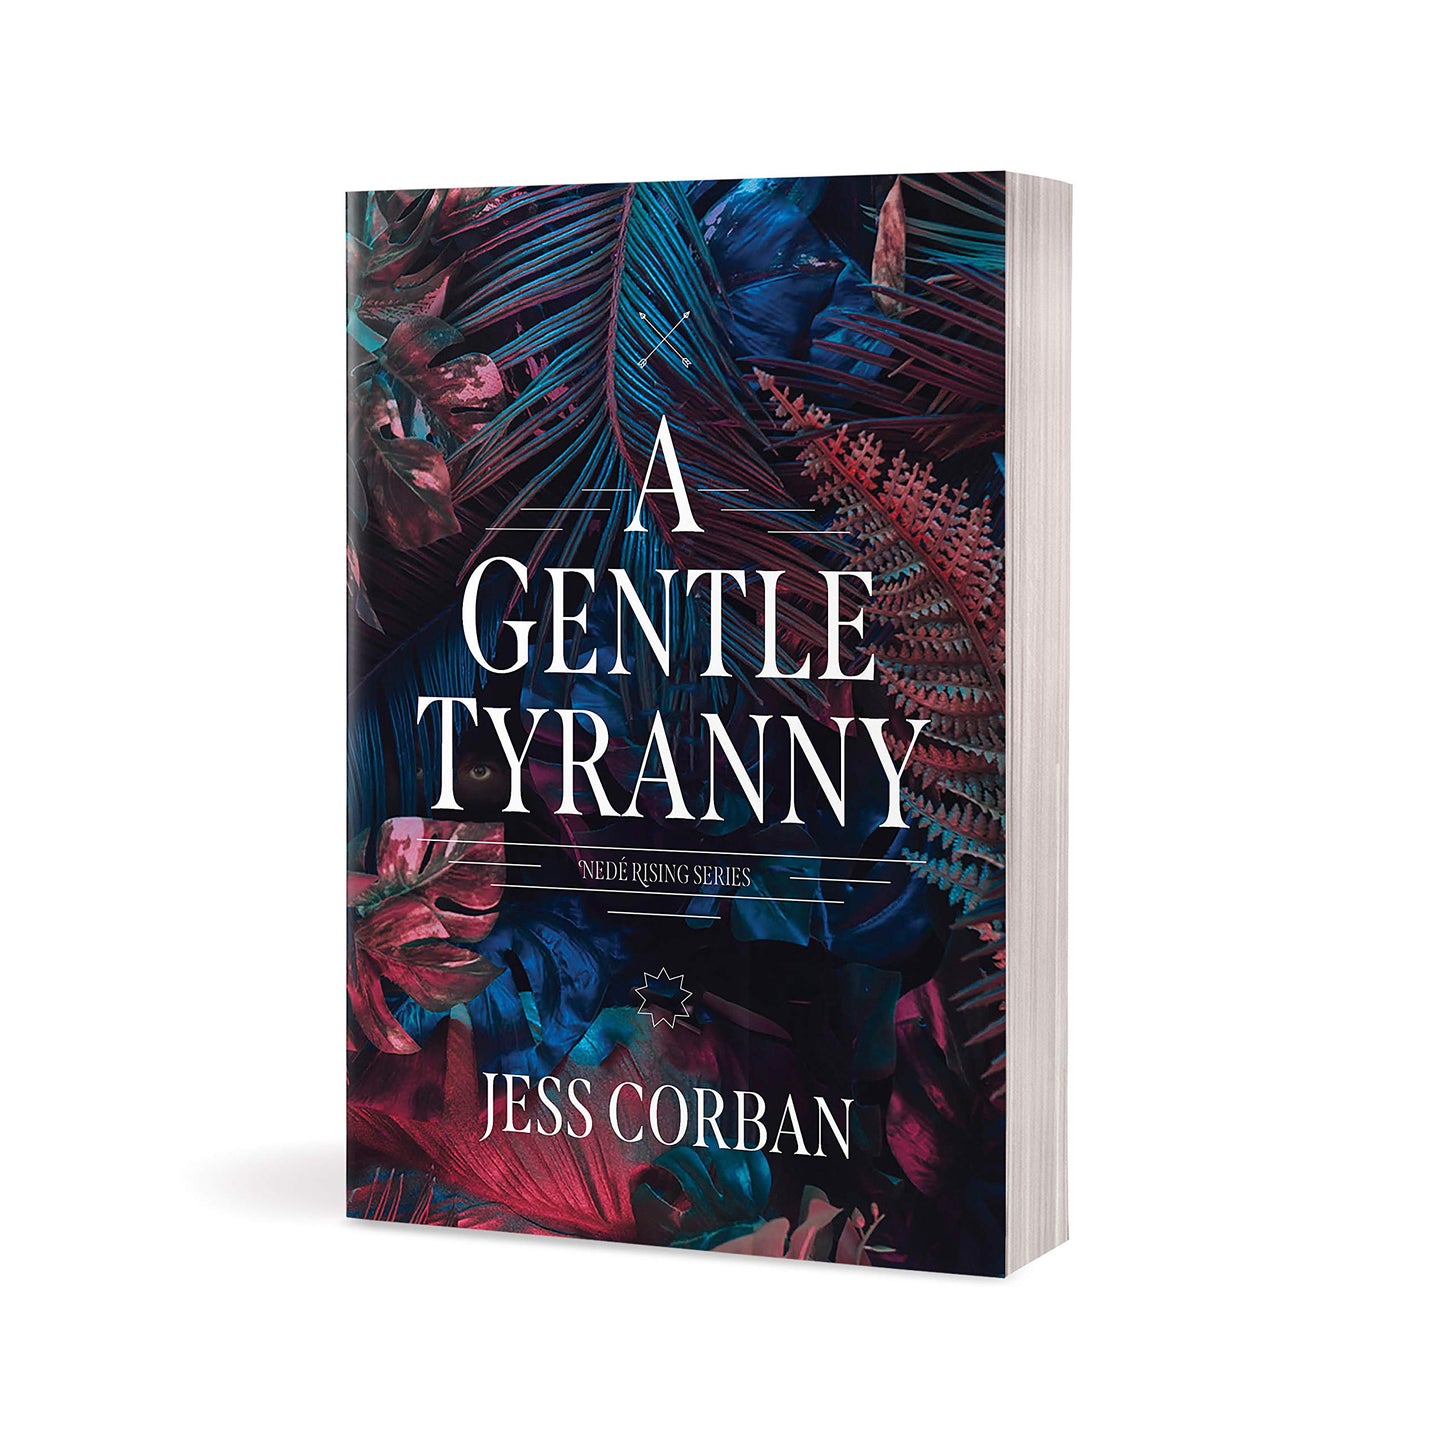 A Gentle Tyranny (Nede Rising Series)